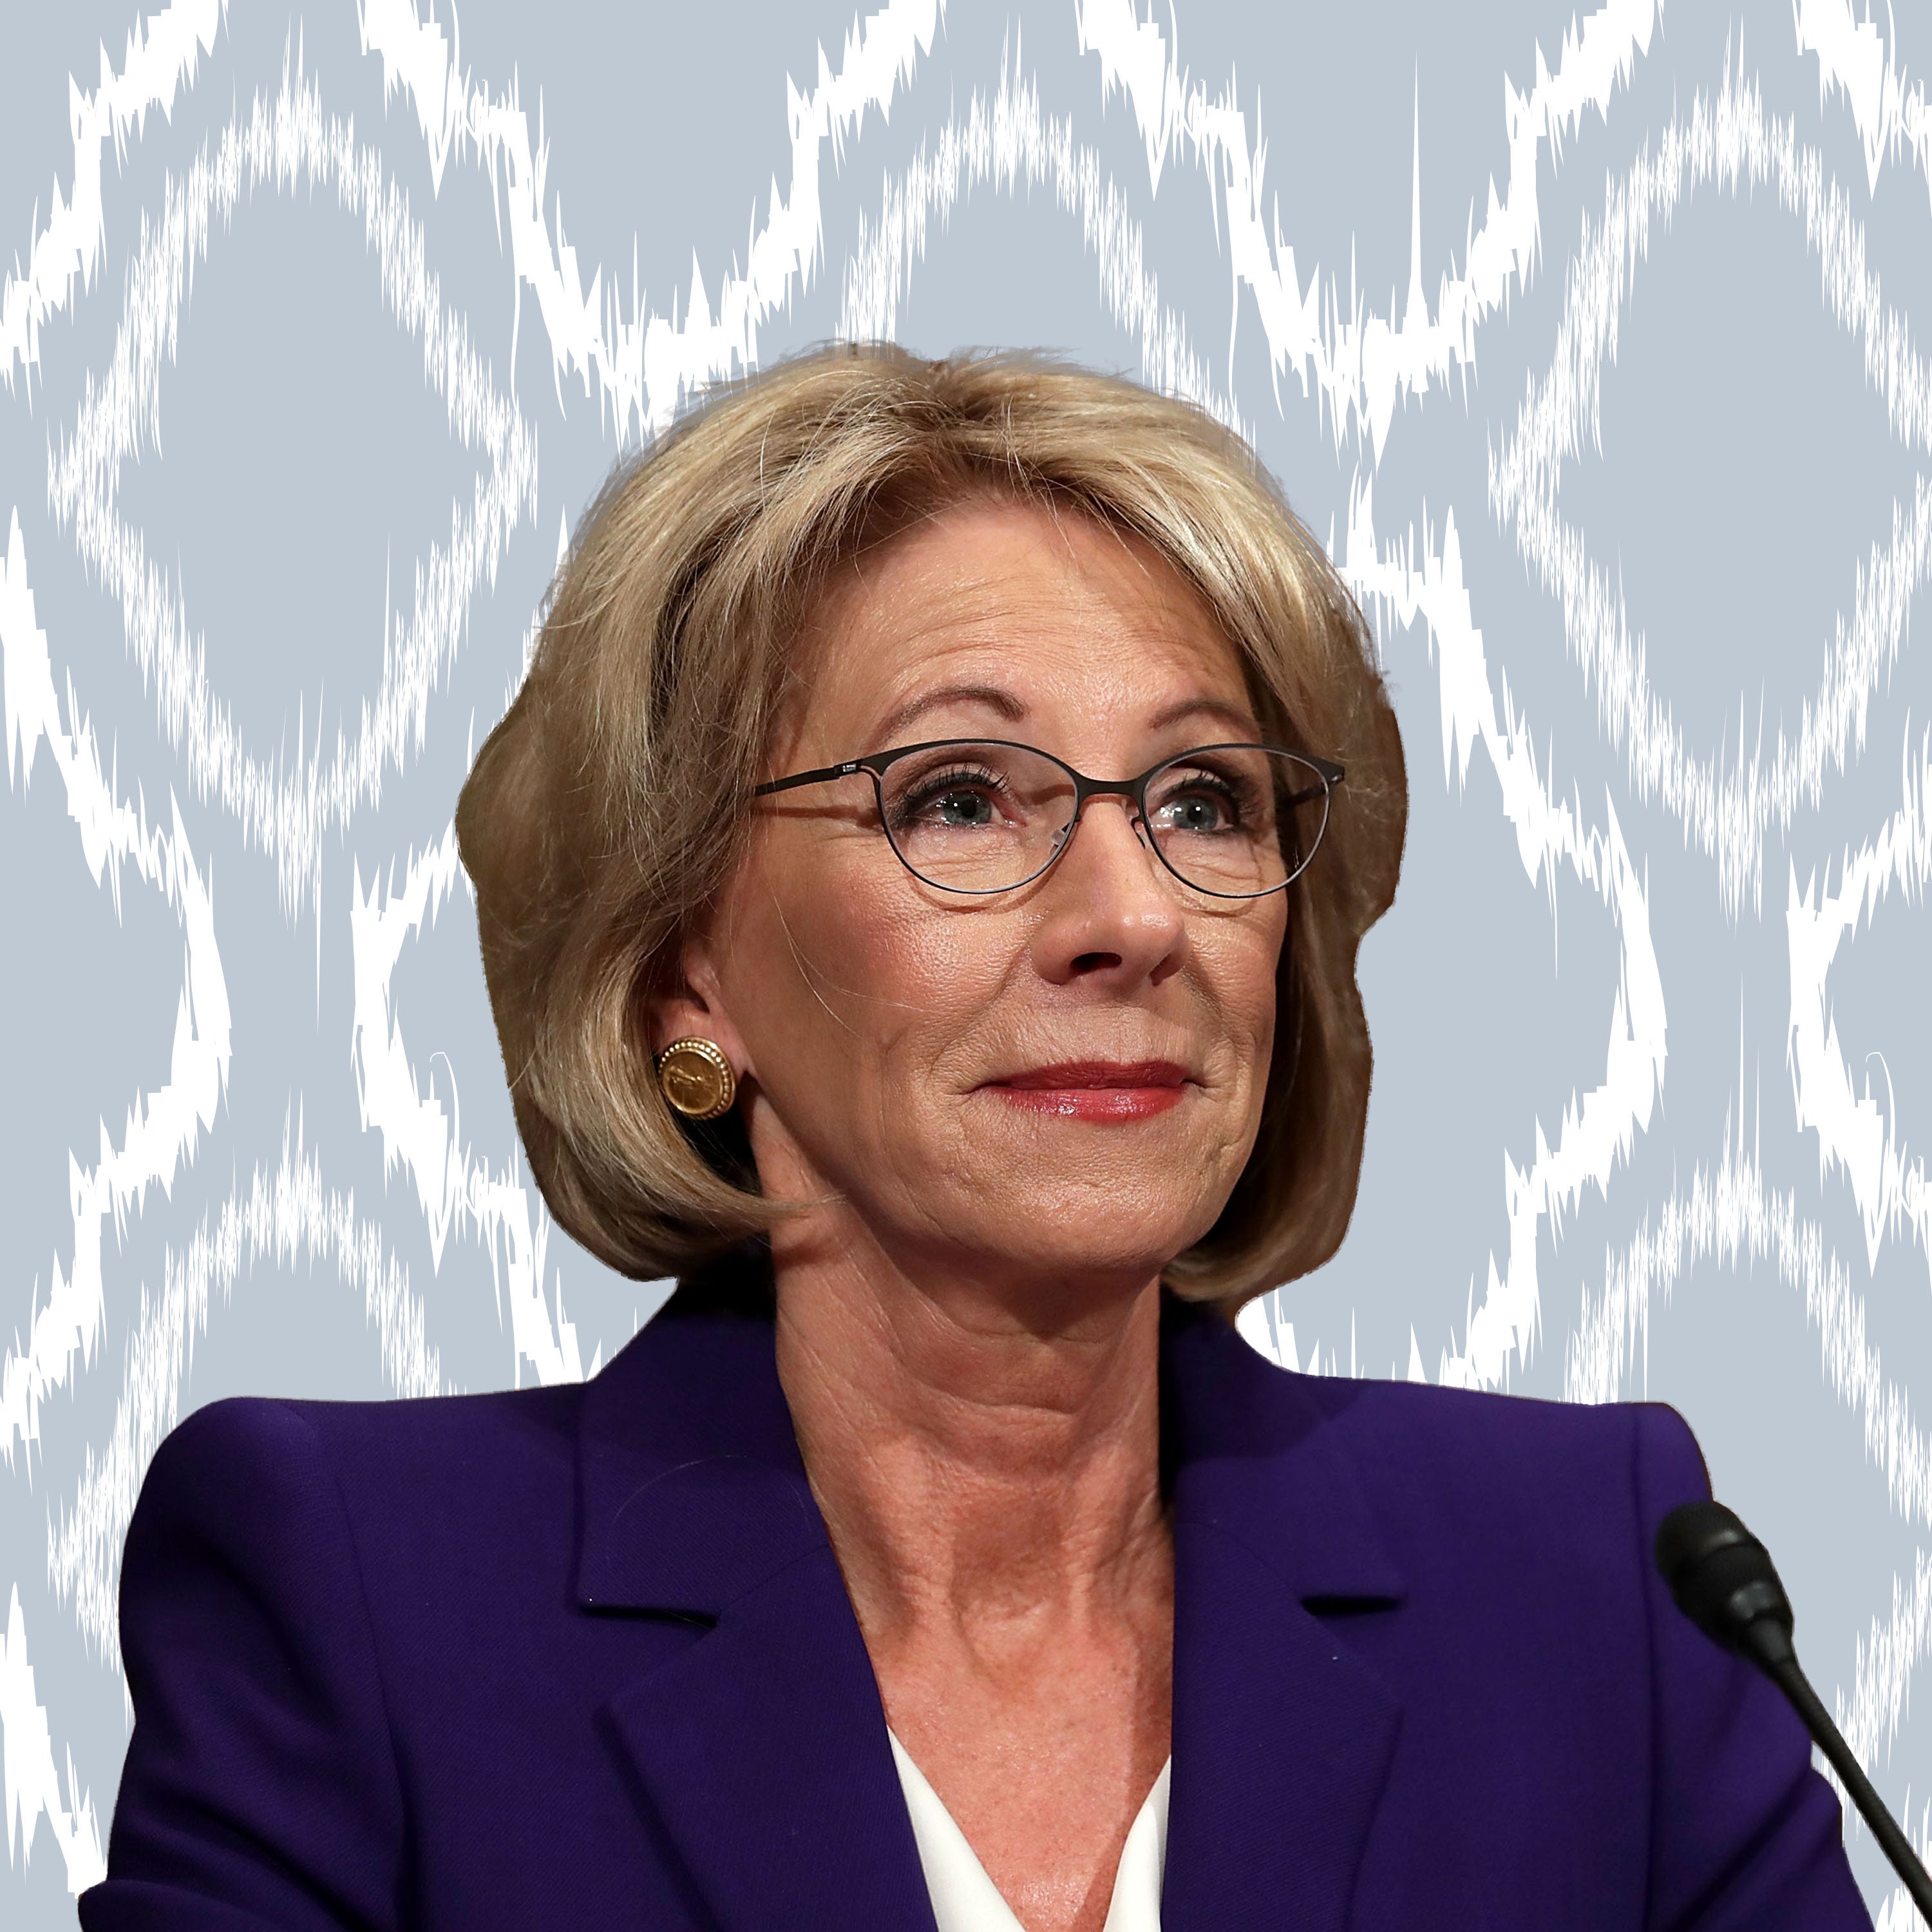 Twitter Erupts After Betsy DeVos Rounds Out Black History Month With Alternative Facts On HBCU’s